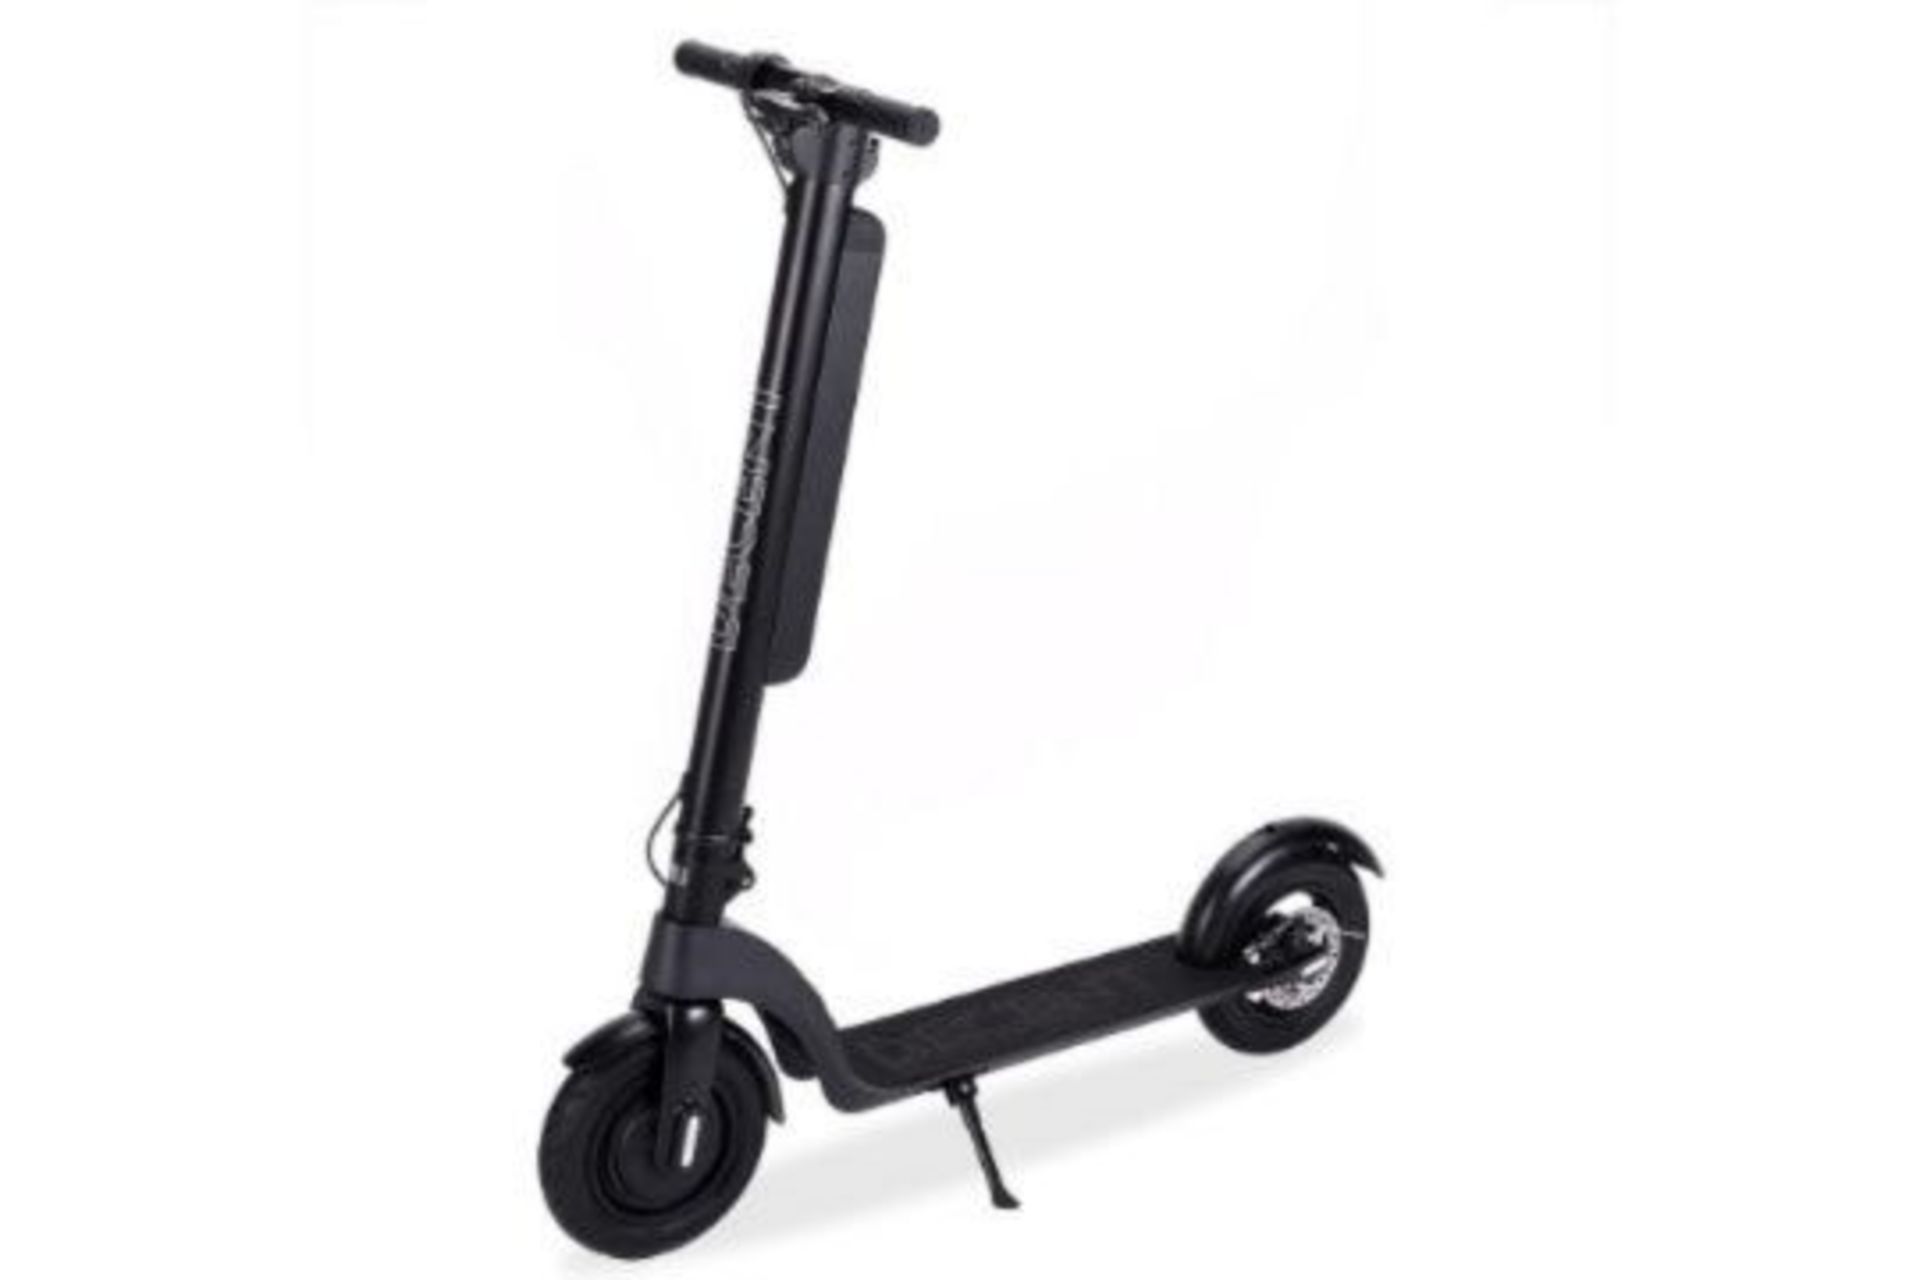 New &Boxed Decent One Electric Scooter - Black. RRP £699.99. The Decent One is powerful, sleek,